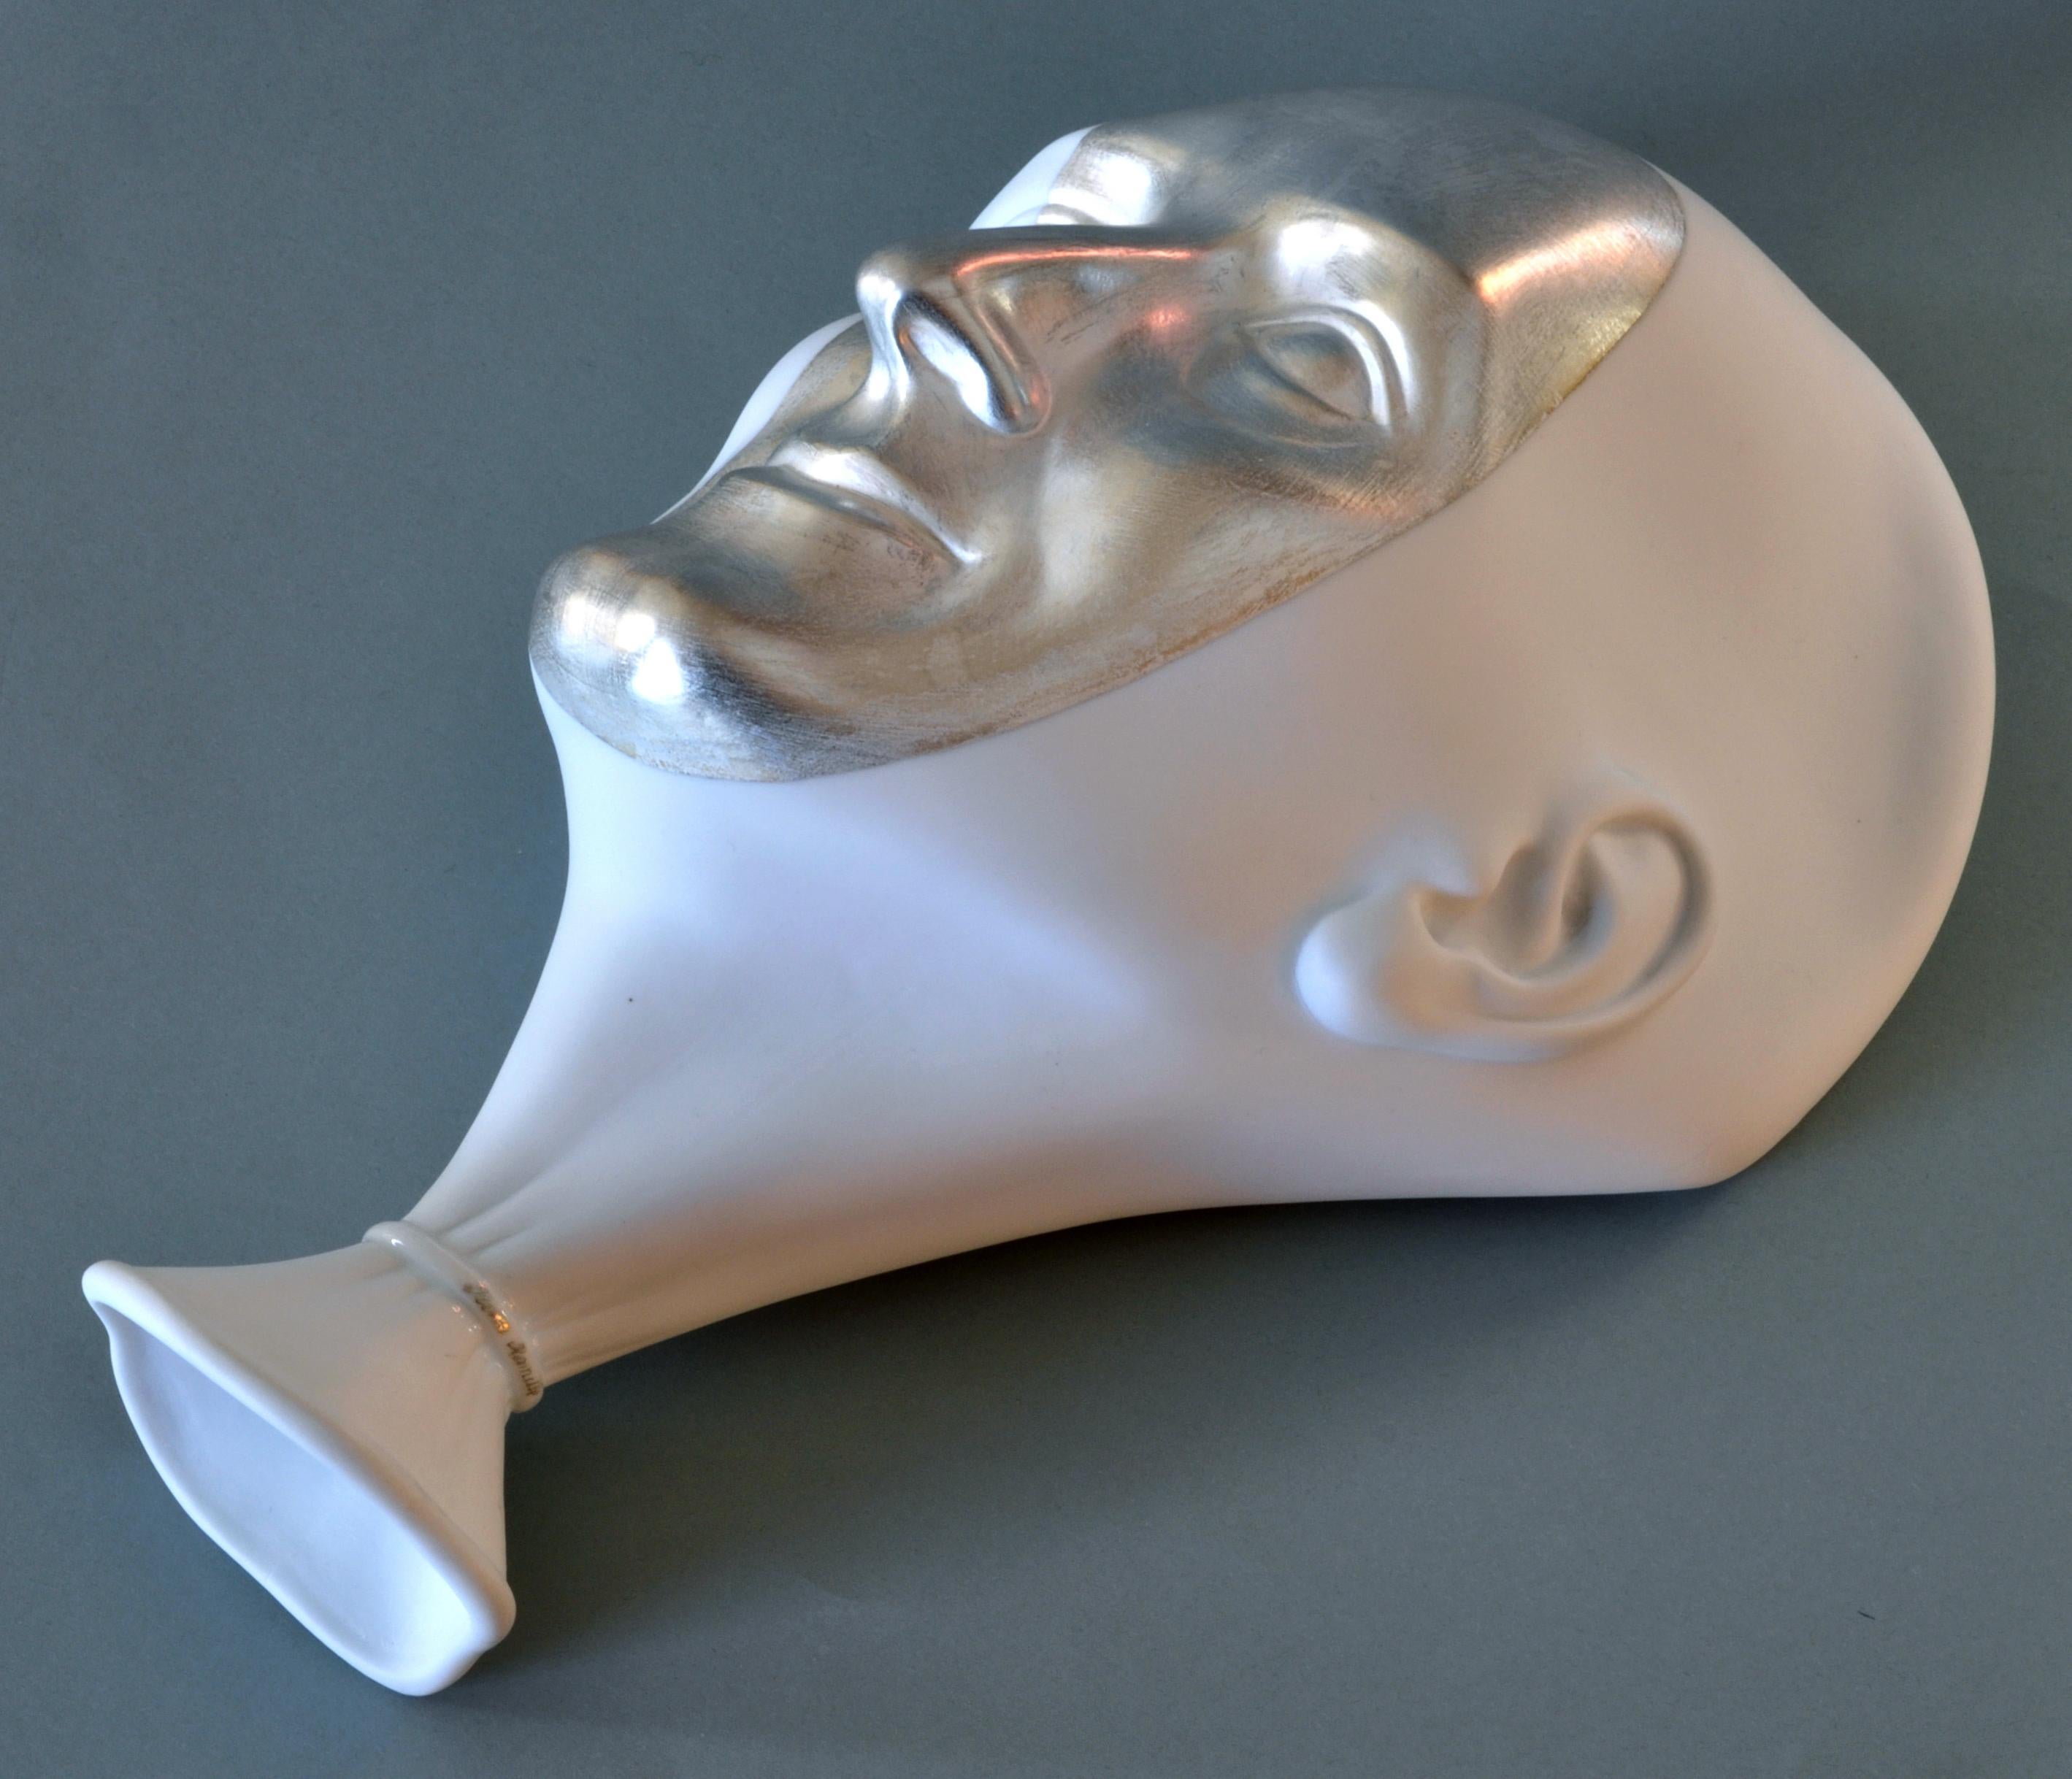 Wall Decor - a silver mask

Porcelain, silver, h 26 cm
by Ilona Romule, leading sculptor in Latvia

The 